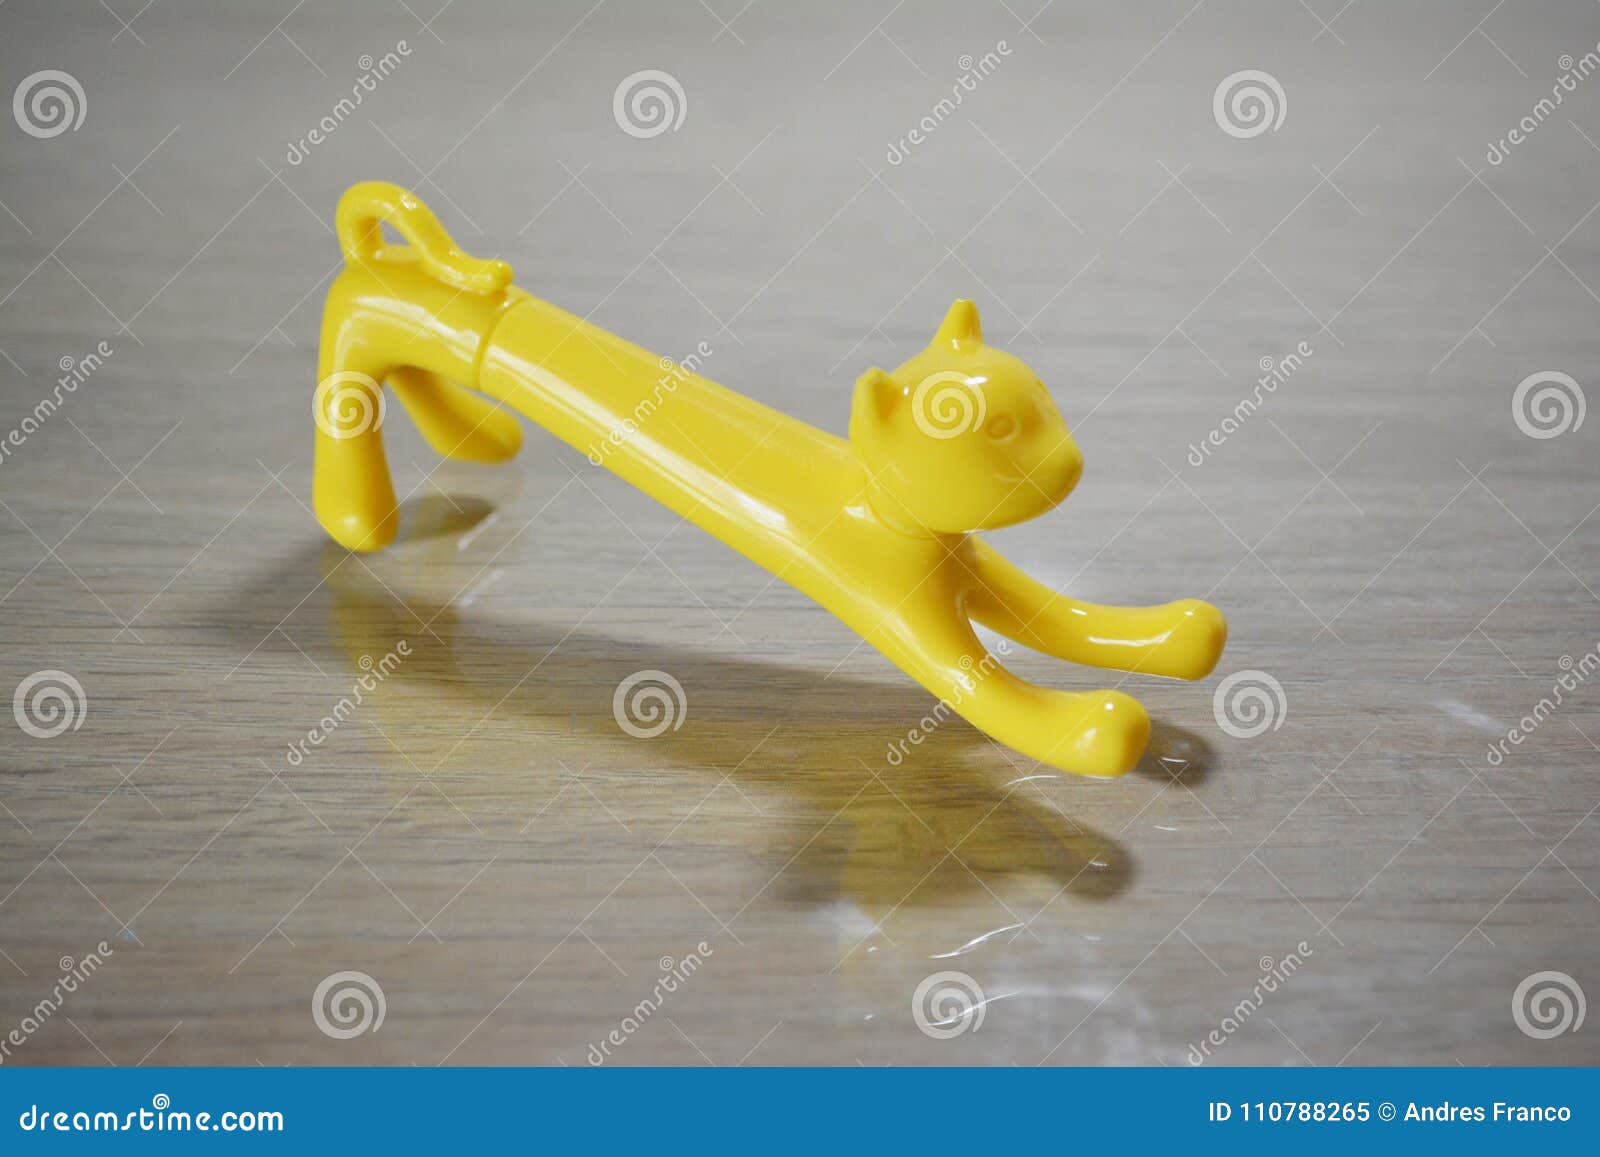 a pencil d yellow toy cat in a side angle